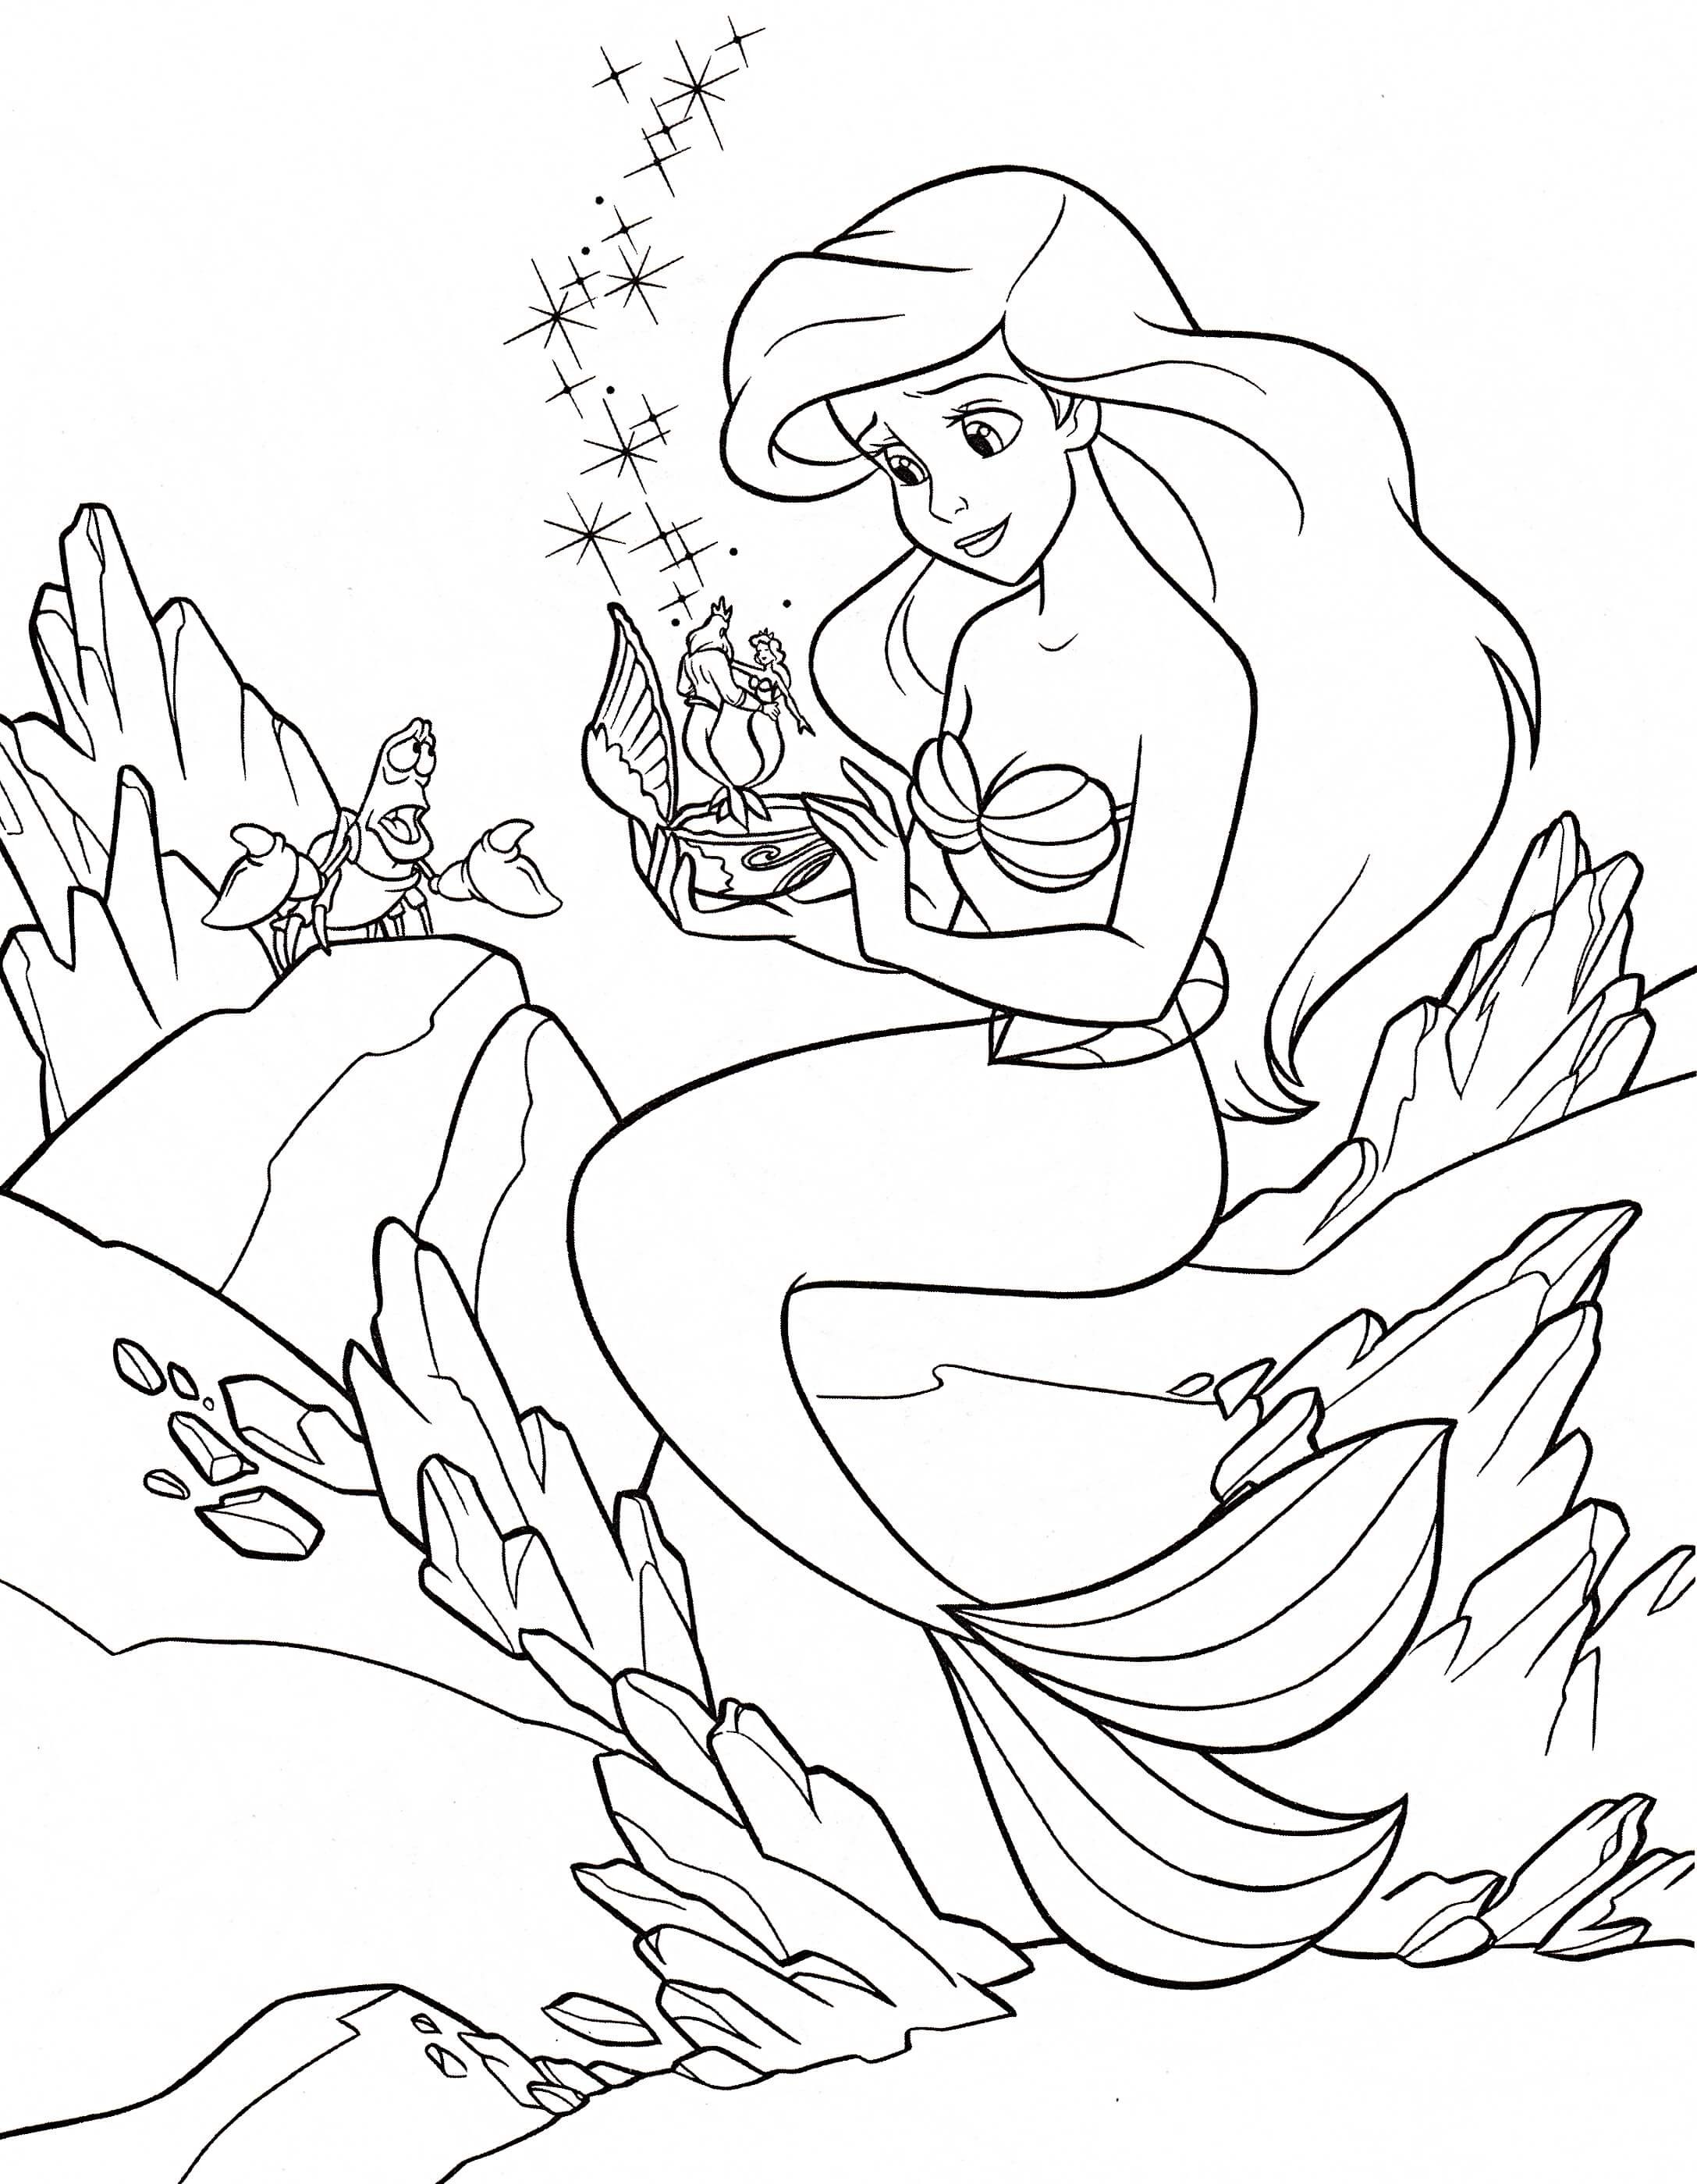 Disney Princess Coloring Pages Ariel Games Human To Print Dress For Kids Free Baby Printable Face